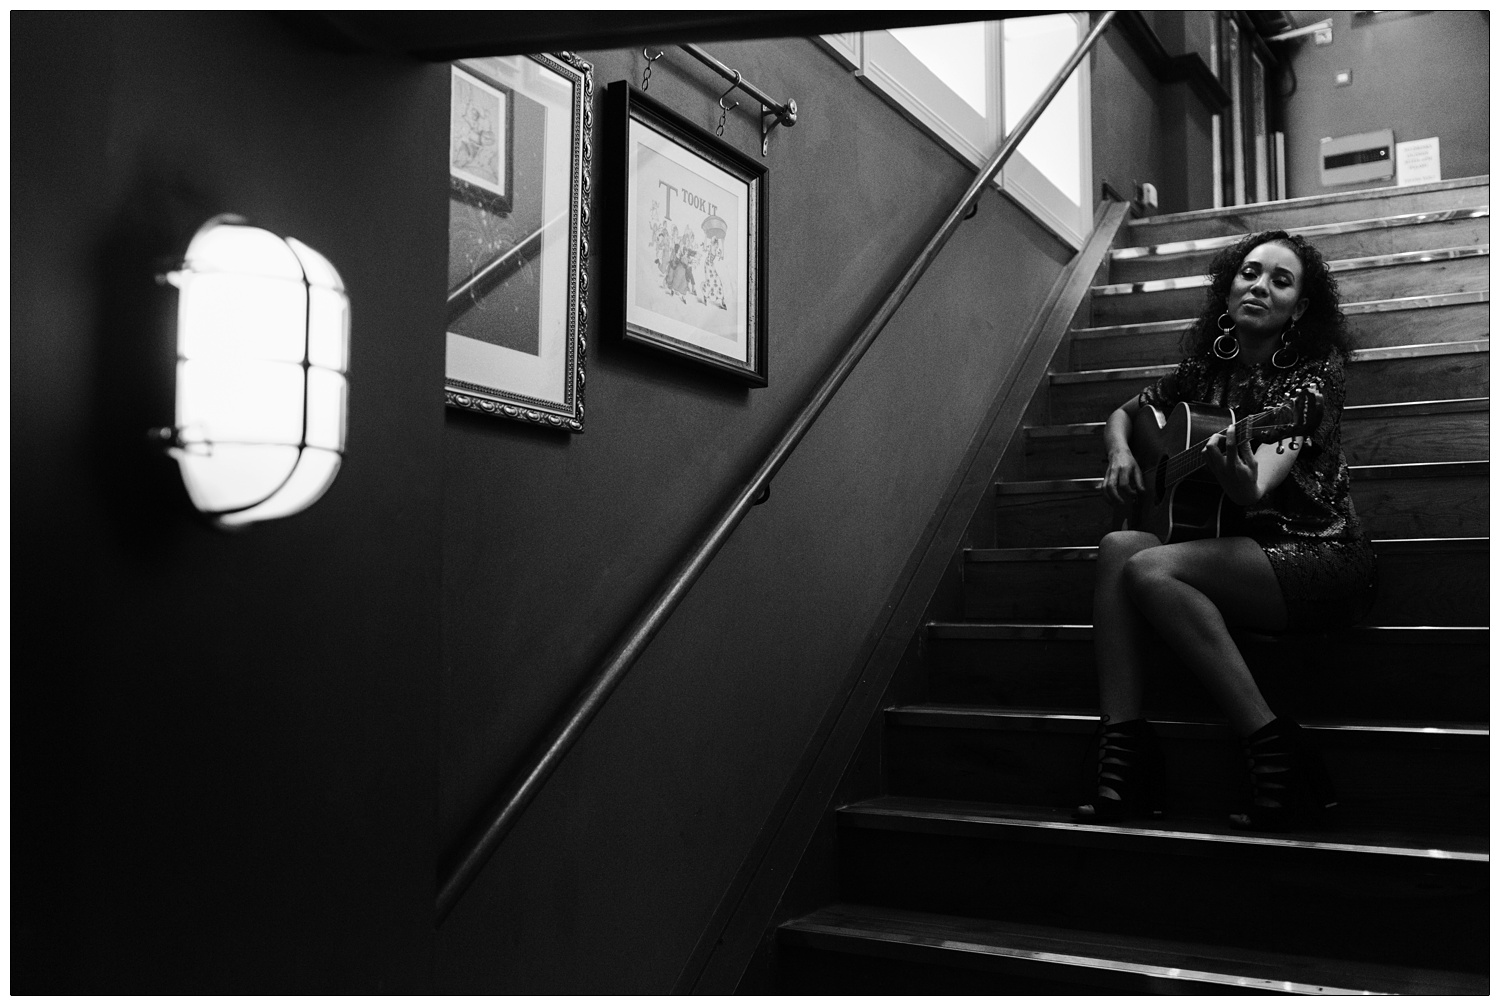 Malaika performing for Disorder magazine on the stairs of a pub